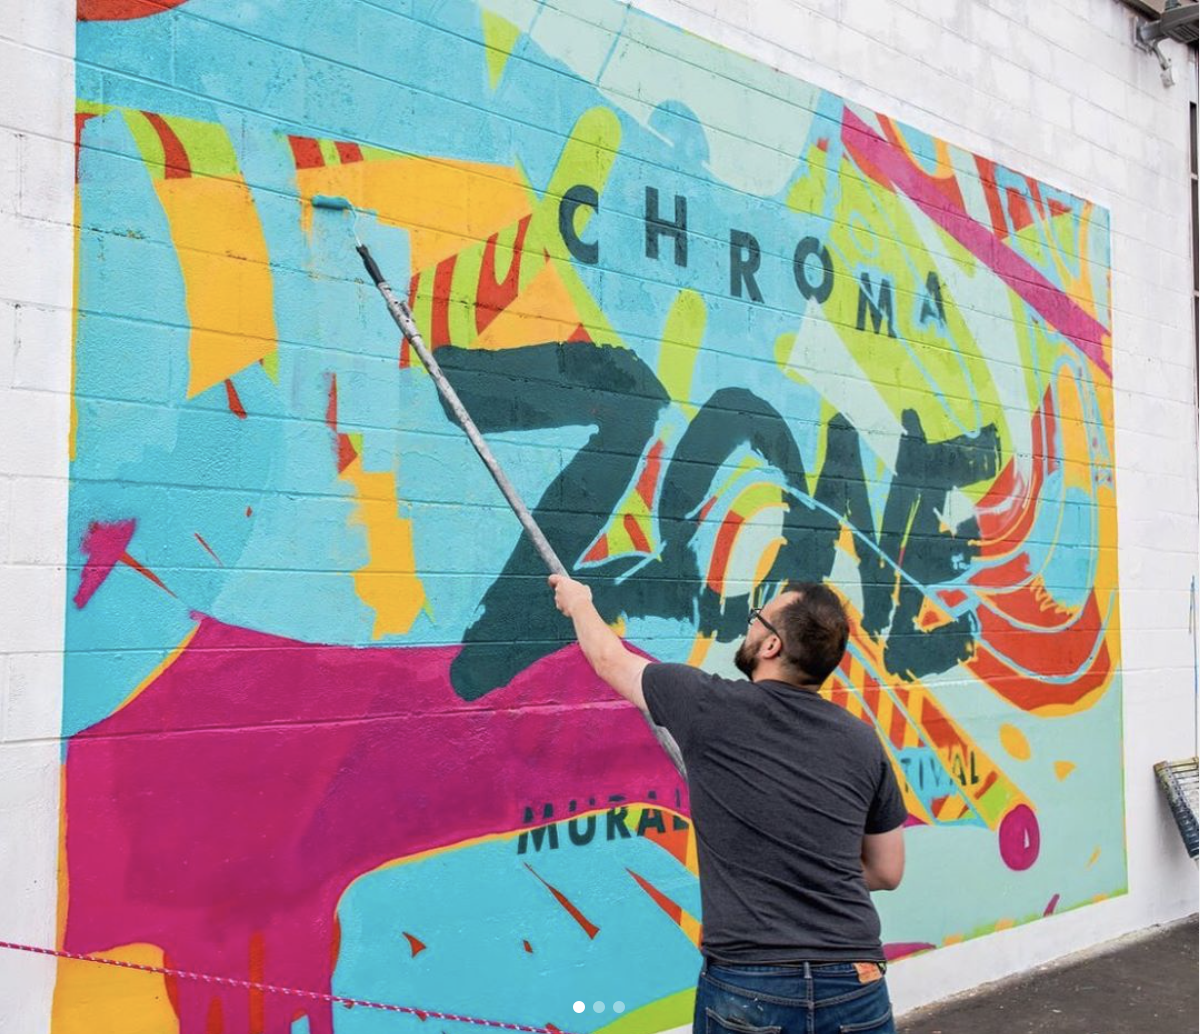 Chroma Zone logo mural painted in 2019 by Wes Winship of Burlesque of North America